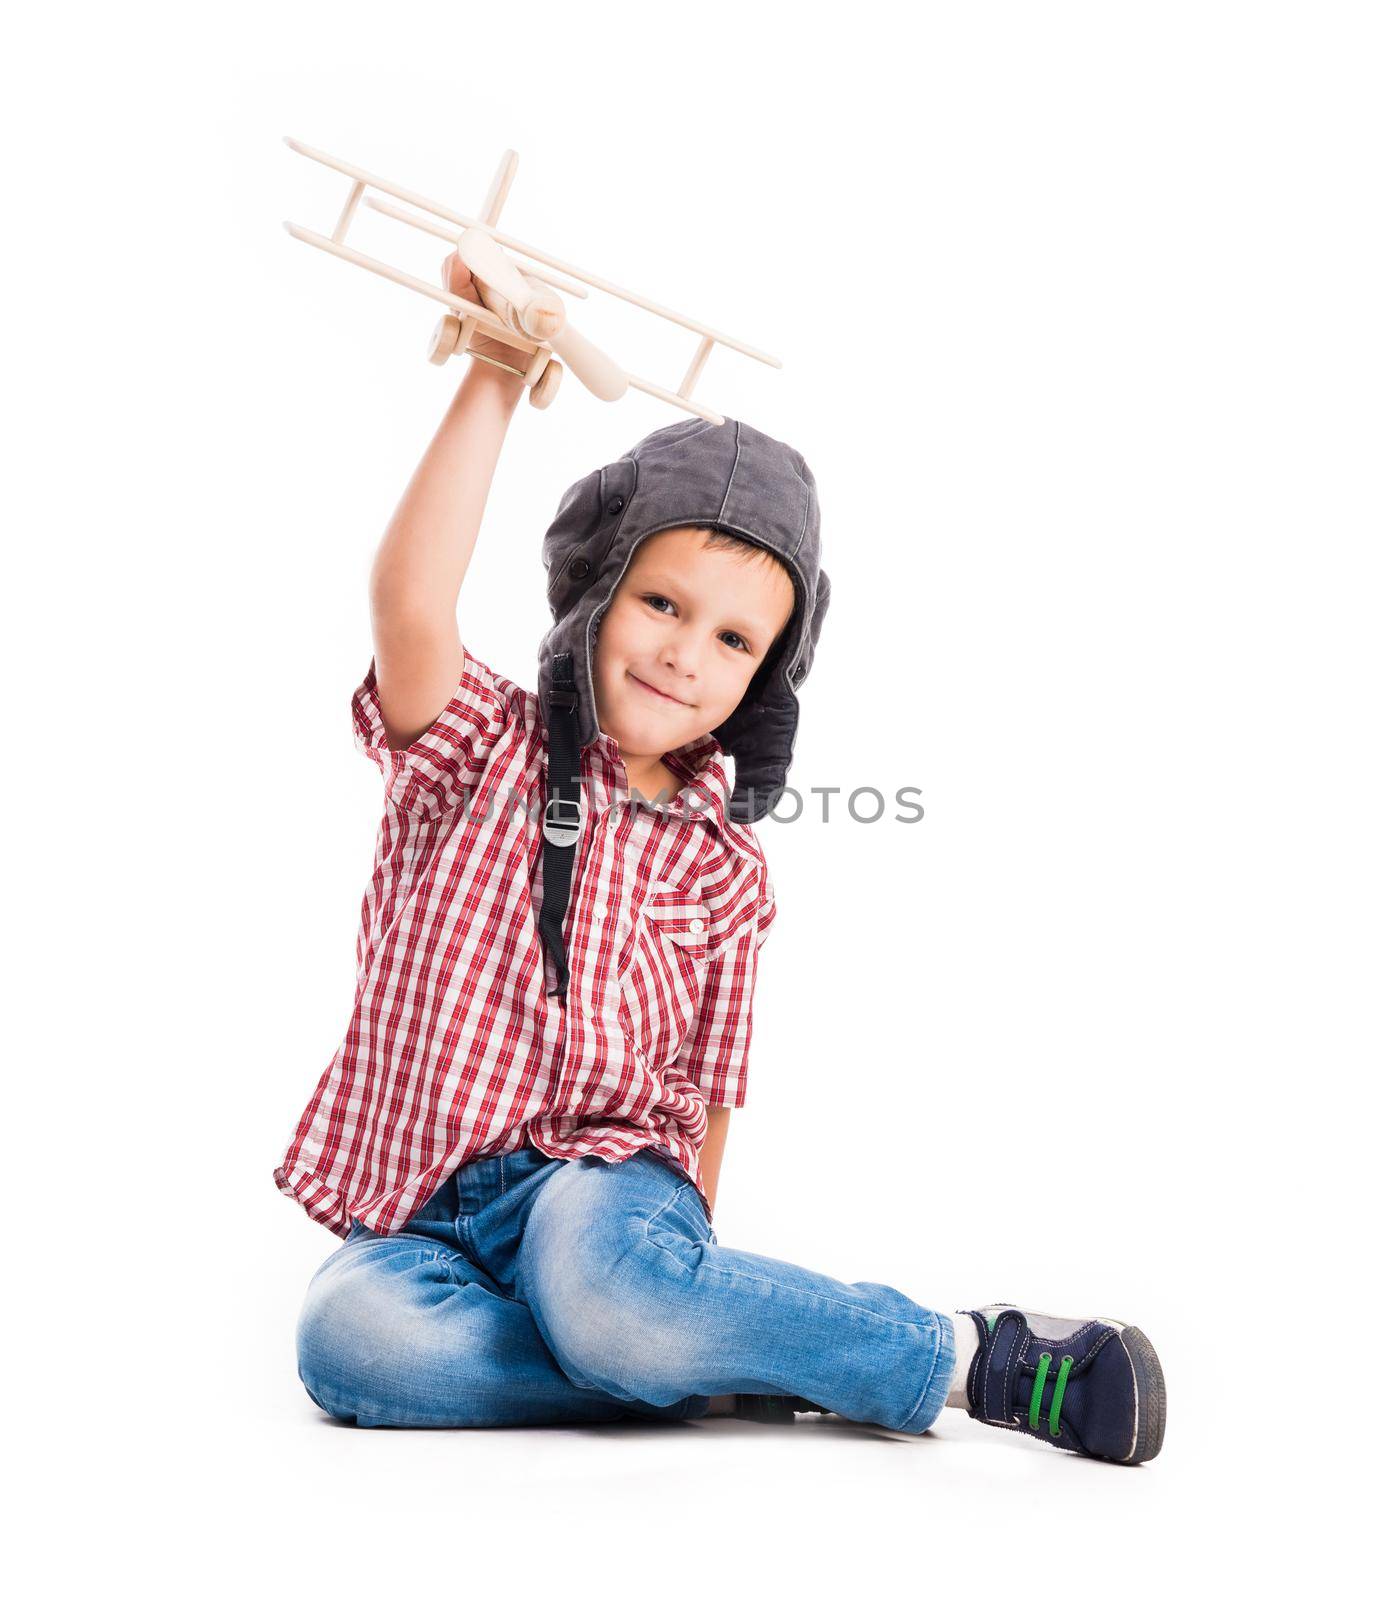 little boy with pilot hat and toy airplane sitting isolated on white background